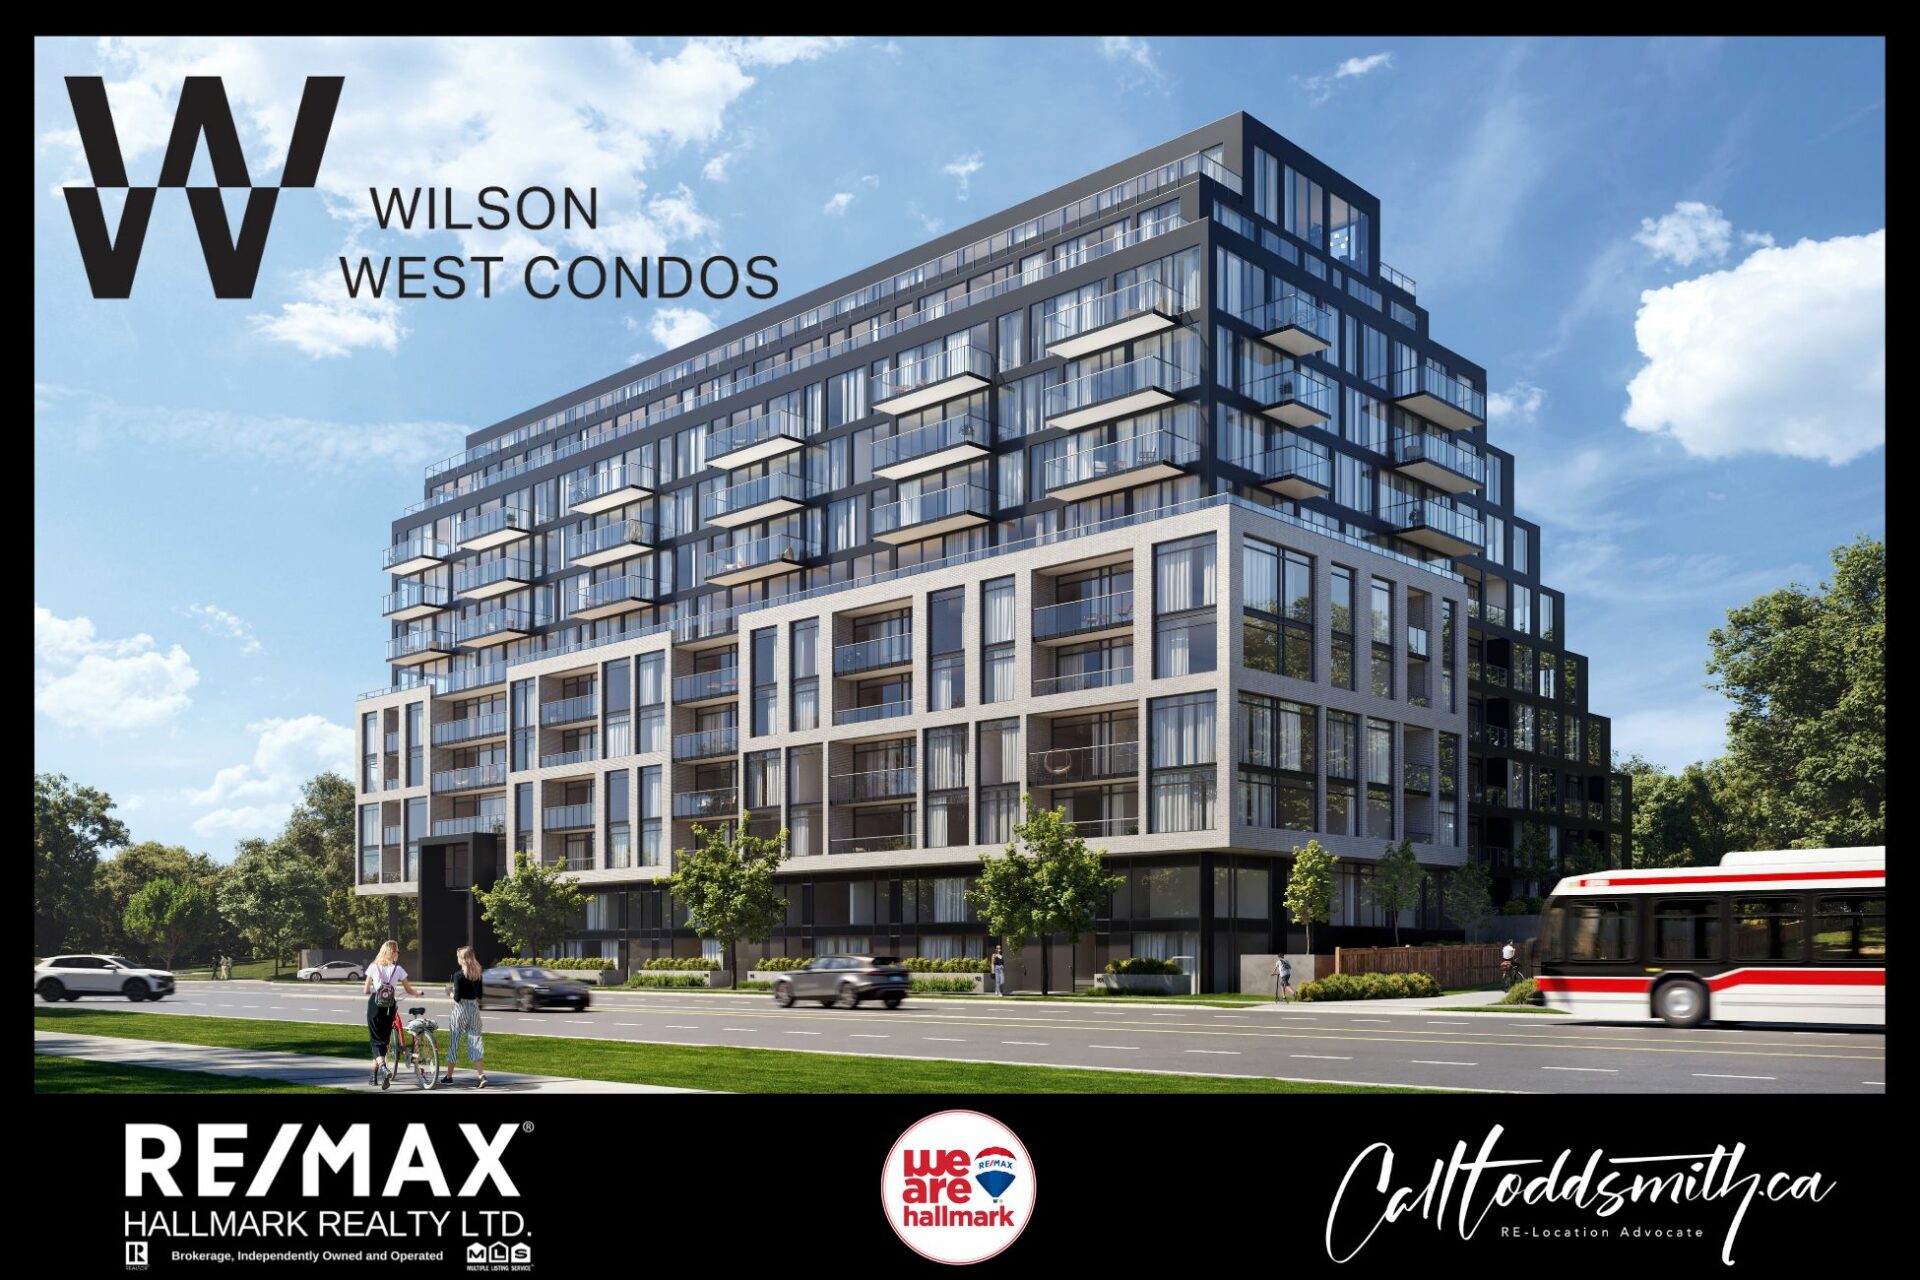 Thumbnail photo of Wilson West Condos showing the condo complex viewing it from the south side of Wilson Ave in Toronto